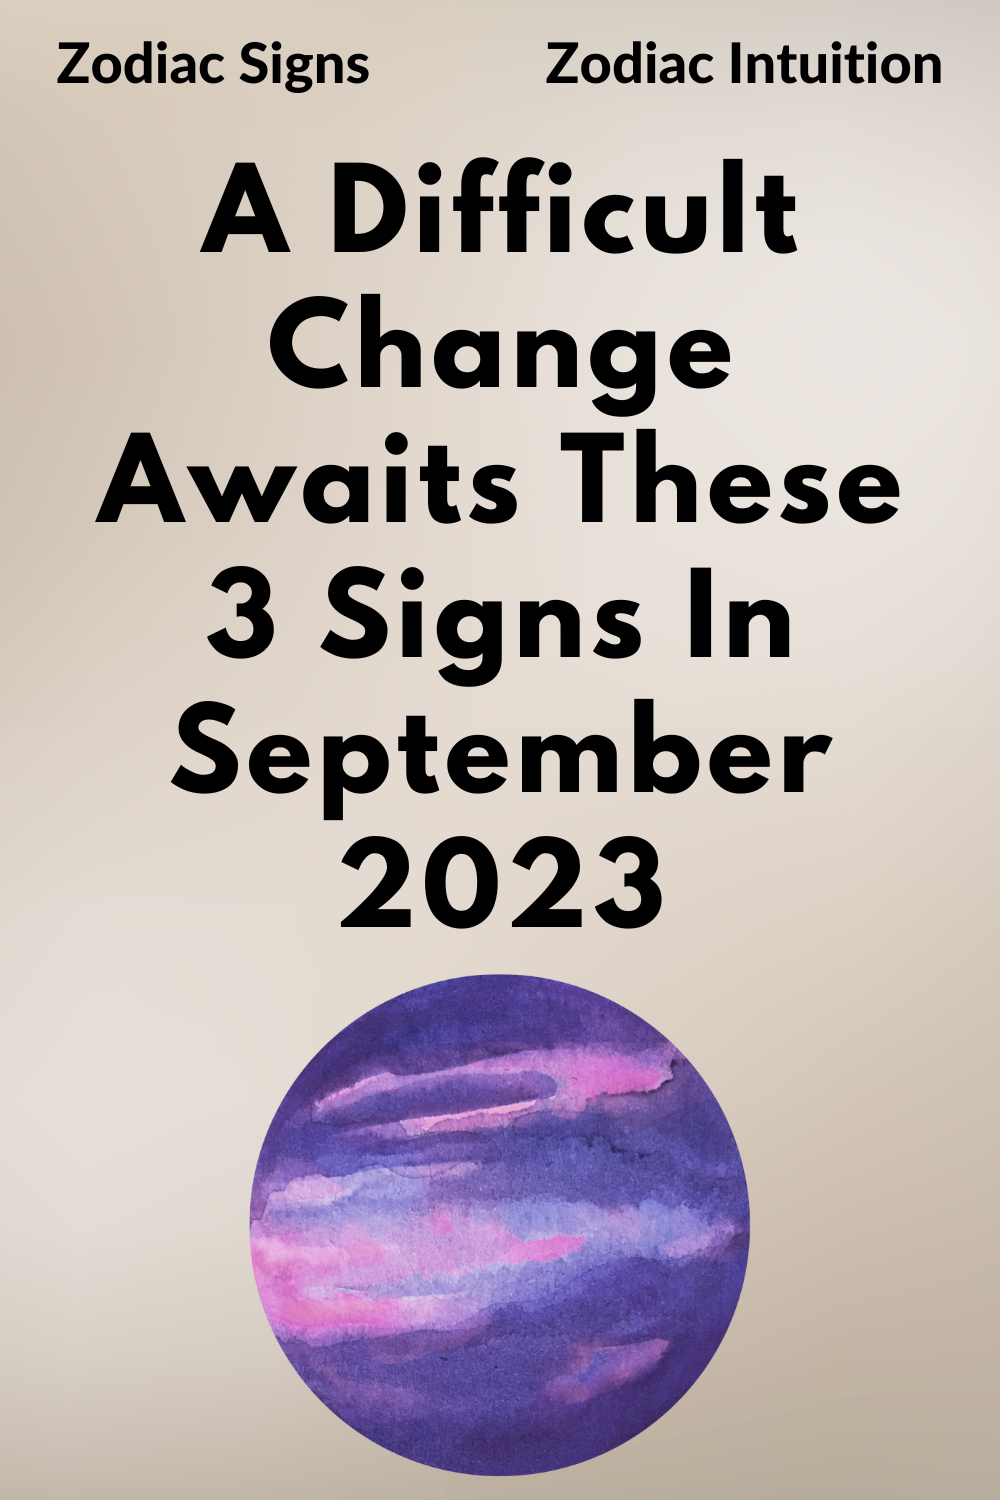 A Difficult Change Awaits These 3 Signs In September 2023